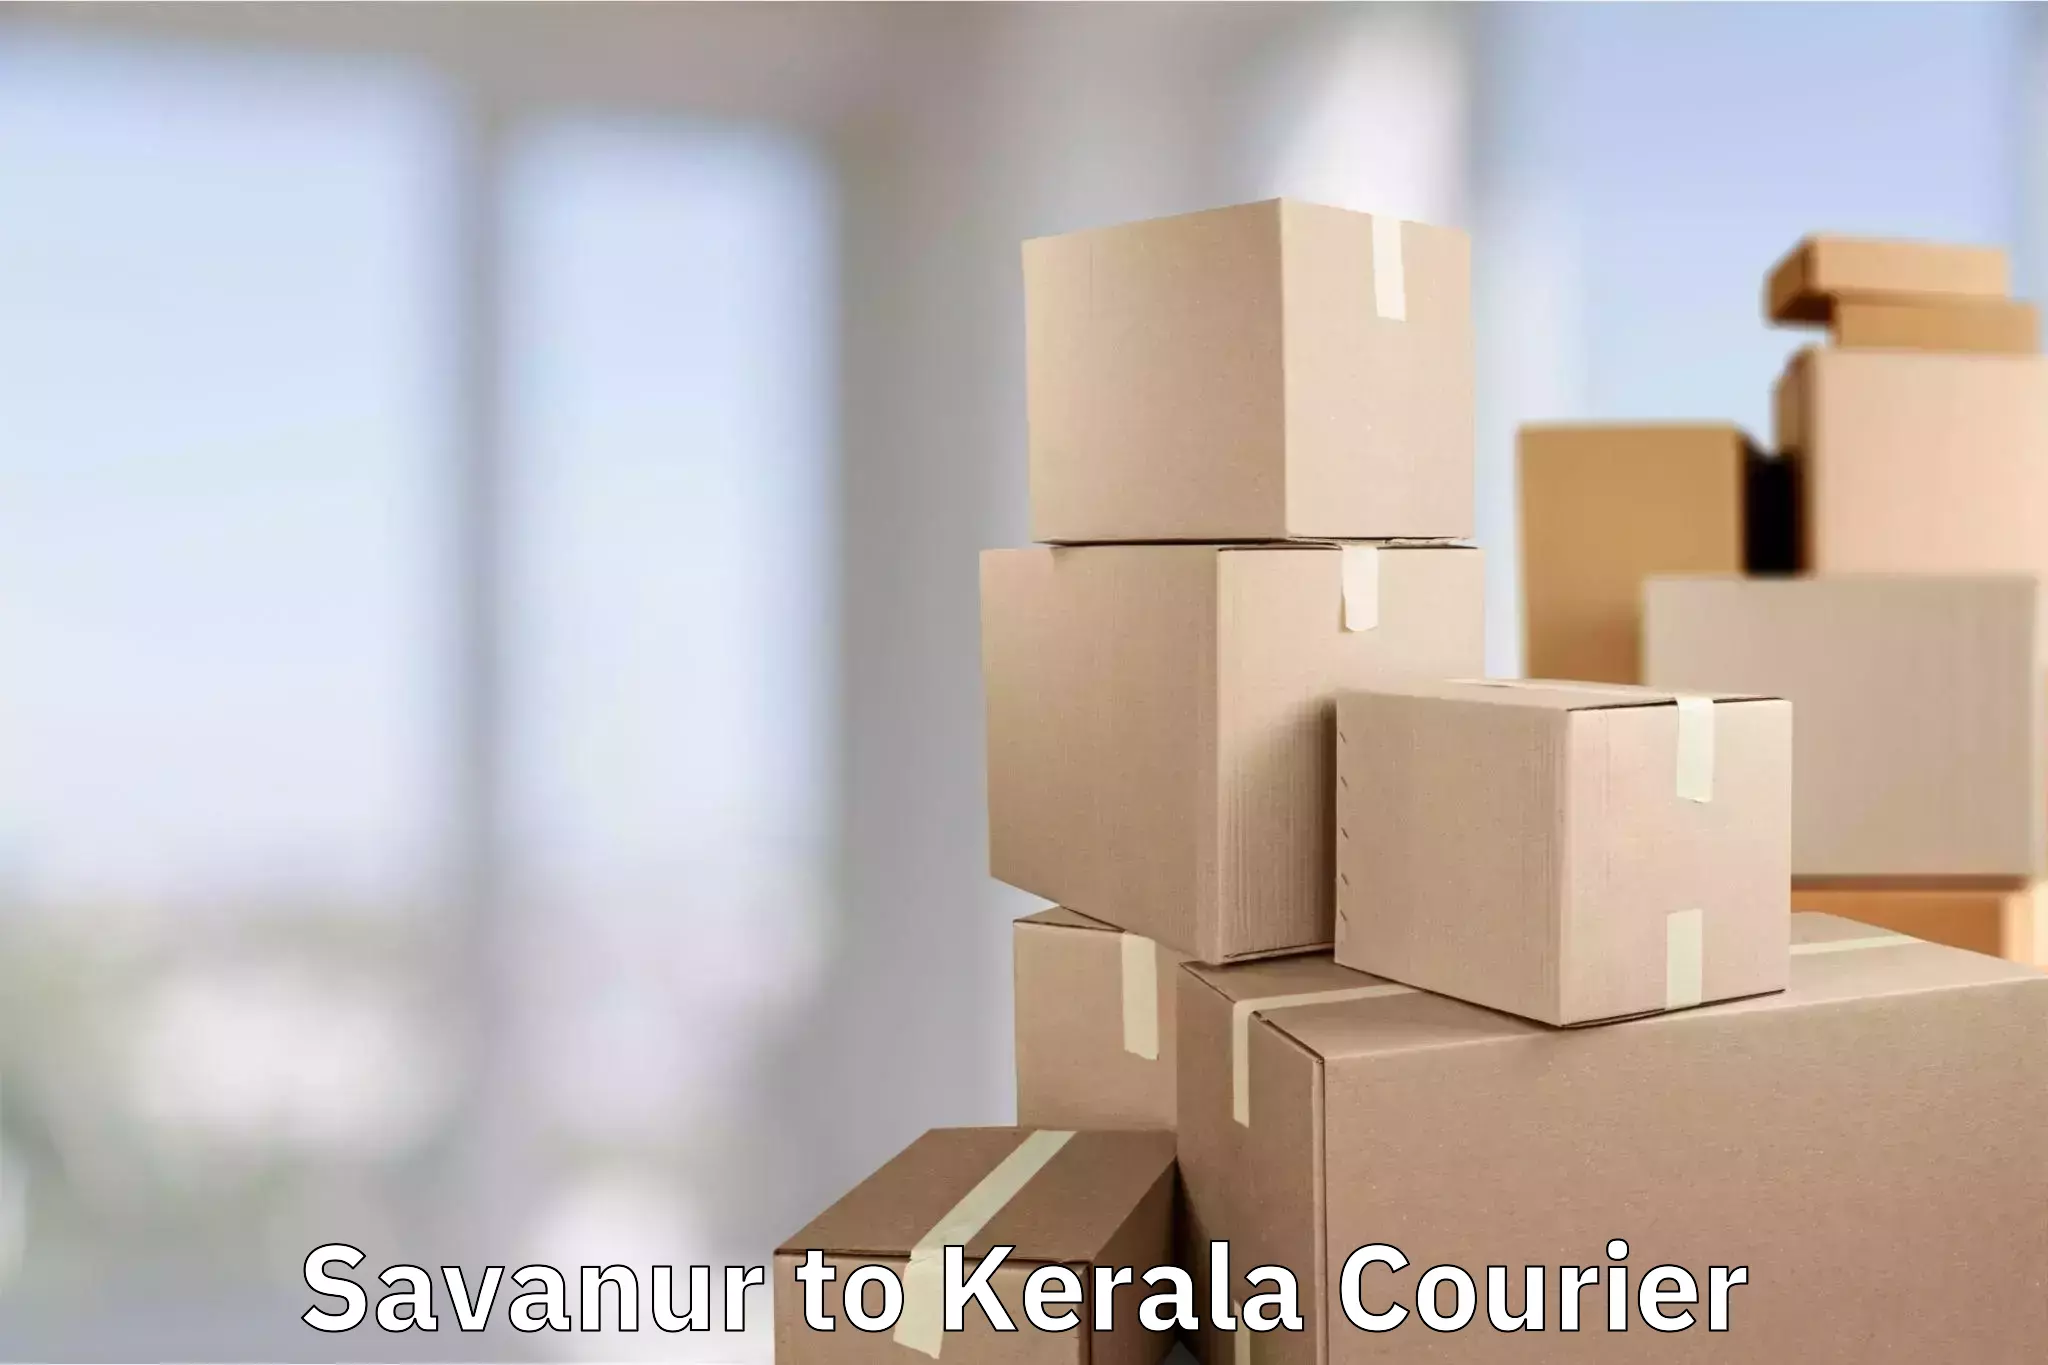 Baggage transport services Savanur to Cochin University of Science and Technology